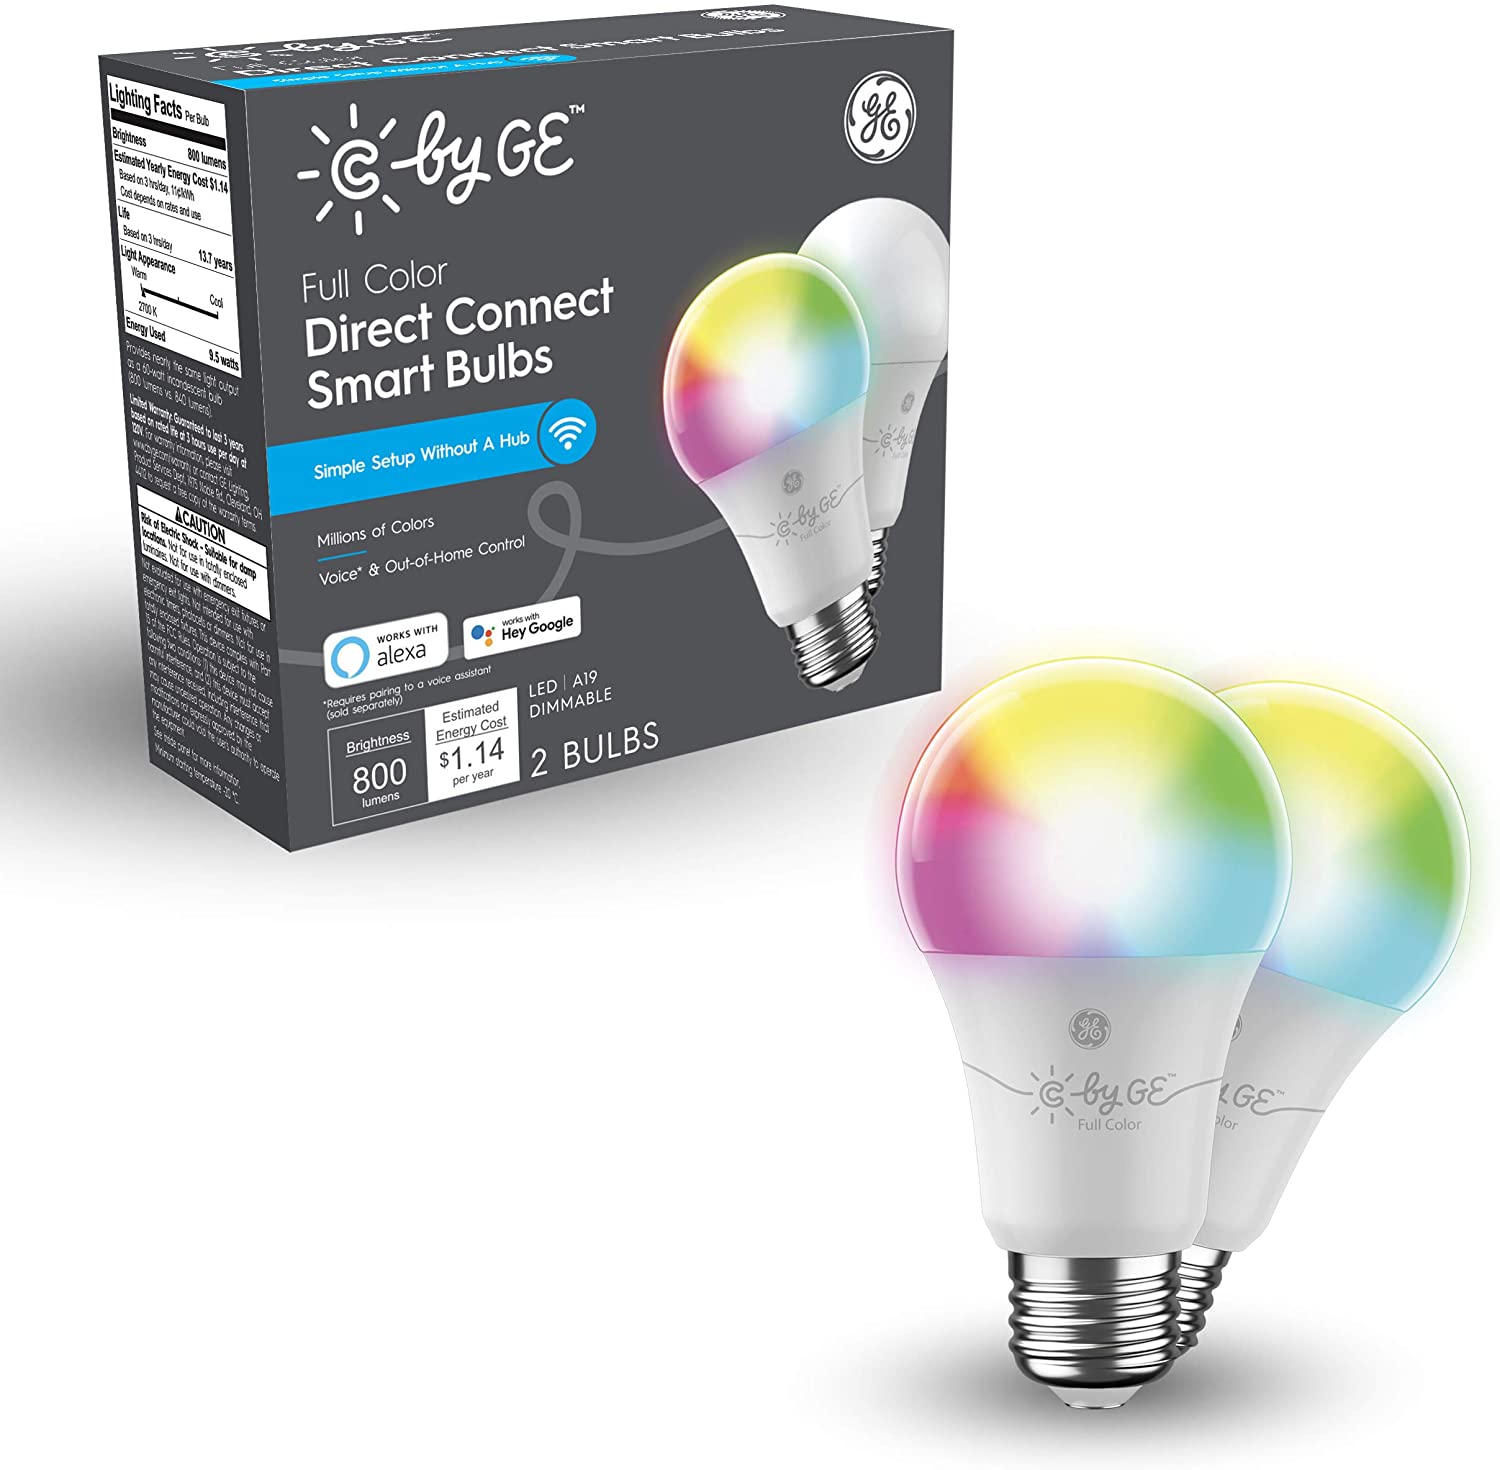 C By Ge Full Color Direct Connect Smart Bulbs Product Render